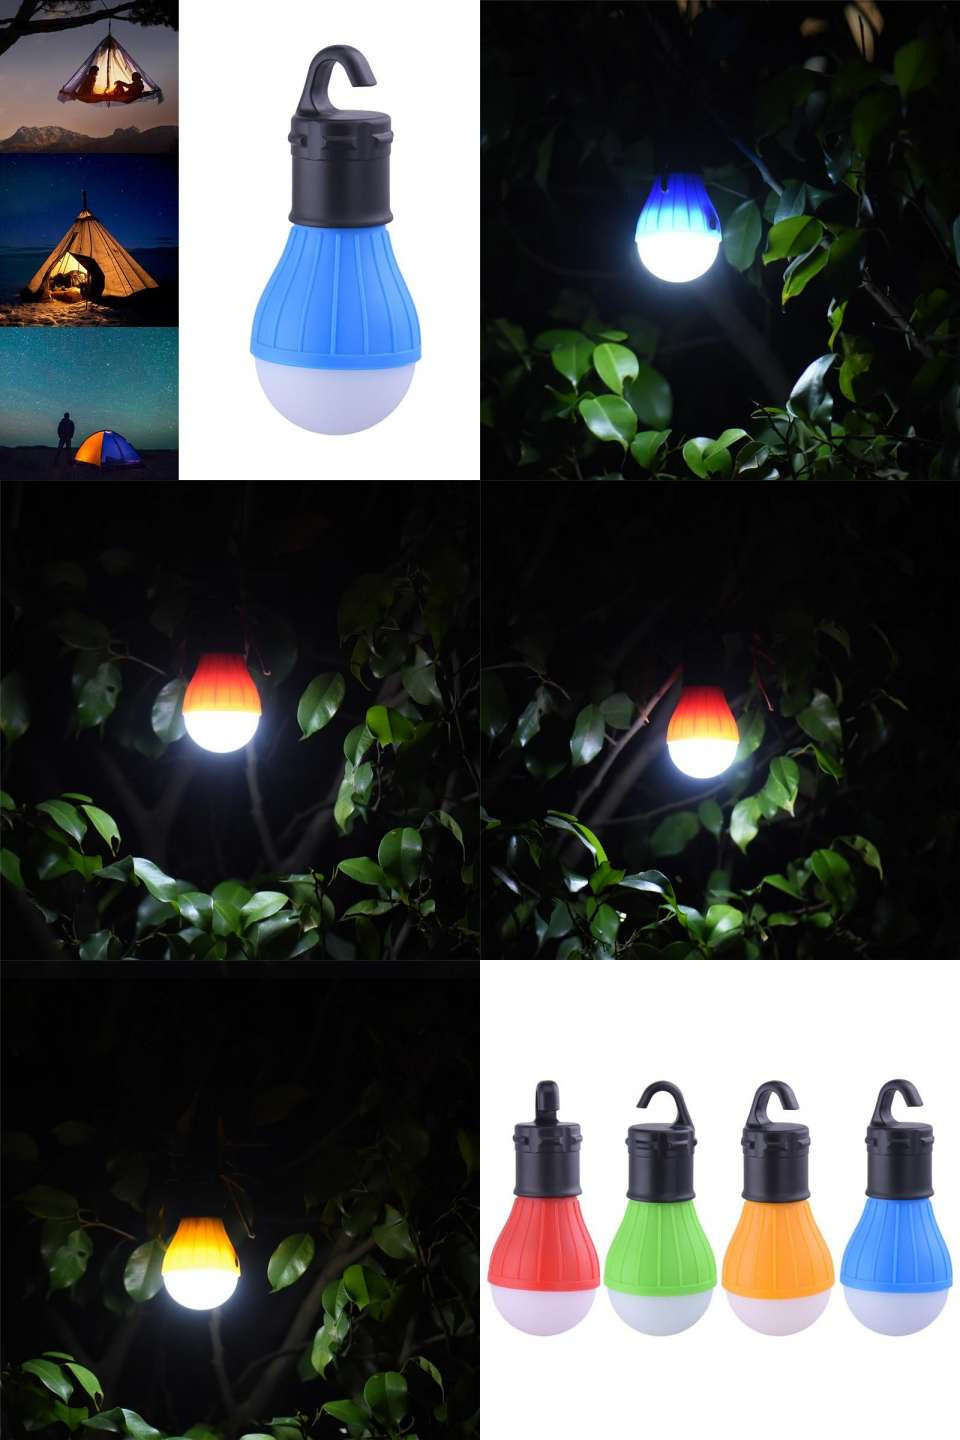 16 Fashionable Vase Lights Amazon 2024 free download vase lights amazon of led fishing lights luxury although visit to buy portable outdoor intended for led fishing lights luxury although visit to buy portable outdoor hanging 3 led camping lan